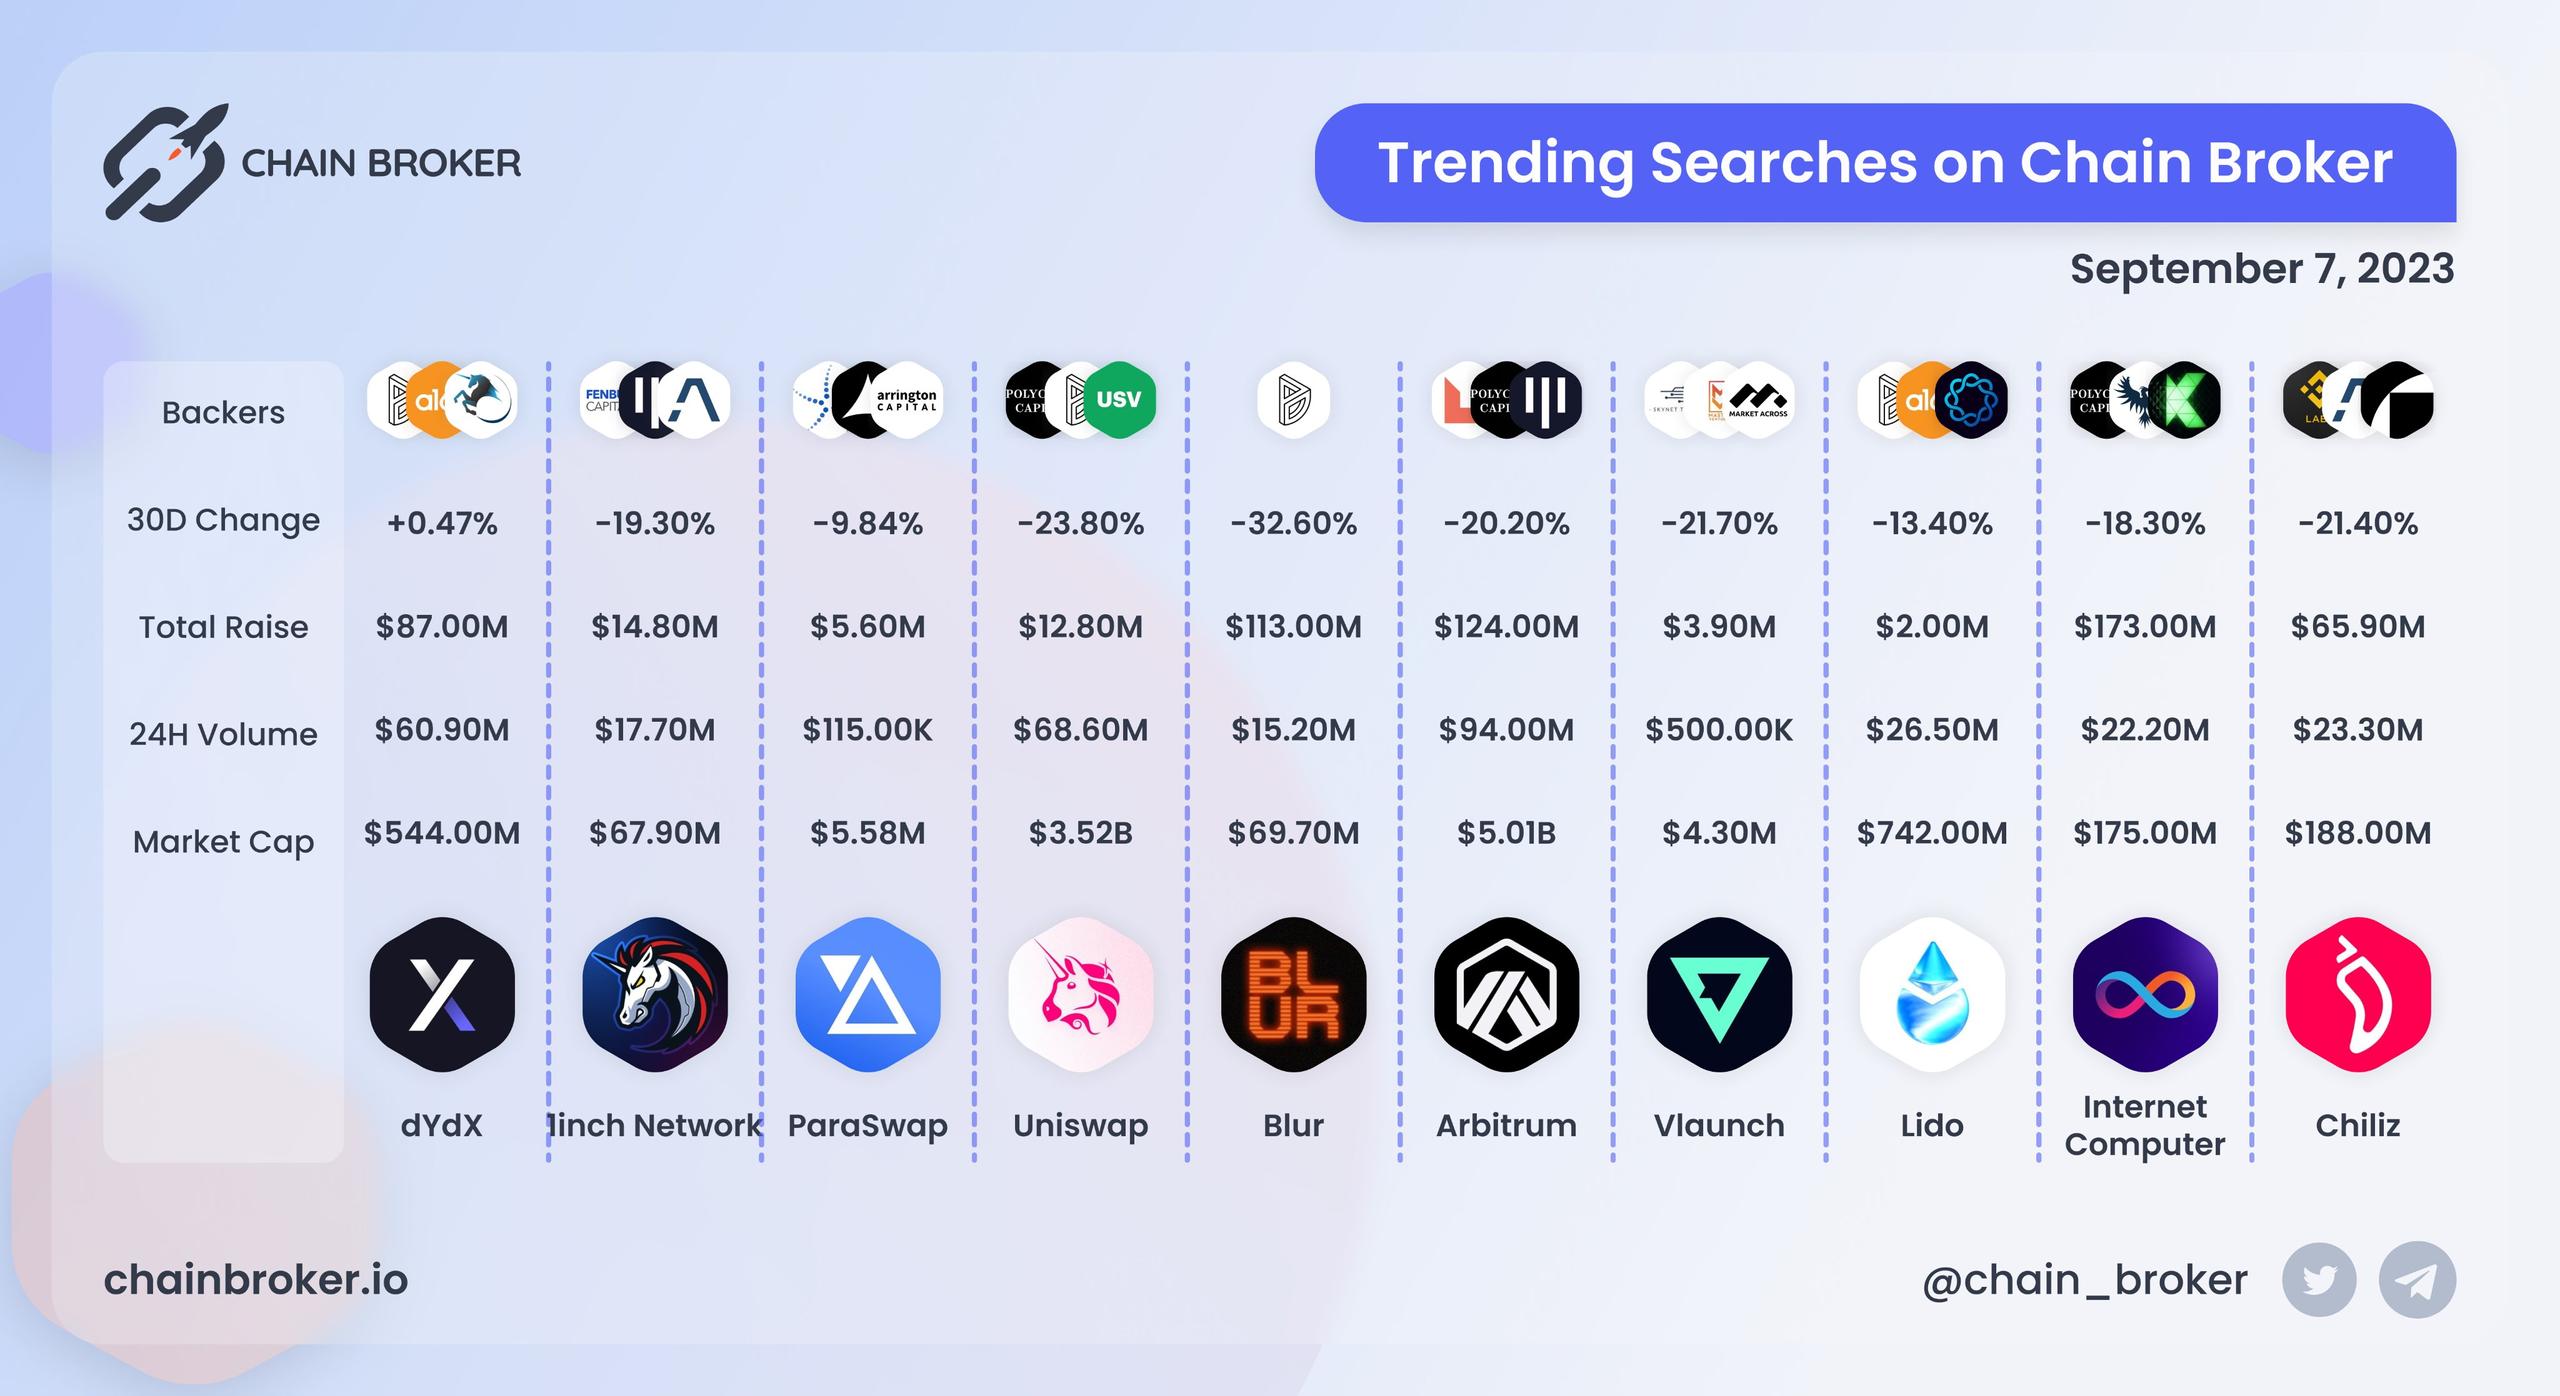 Trending Searches on Chain Broker